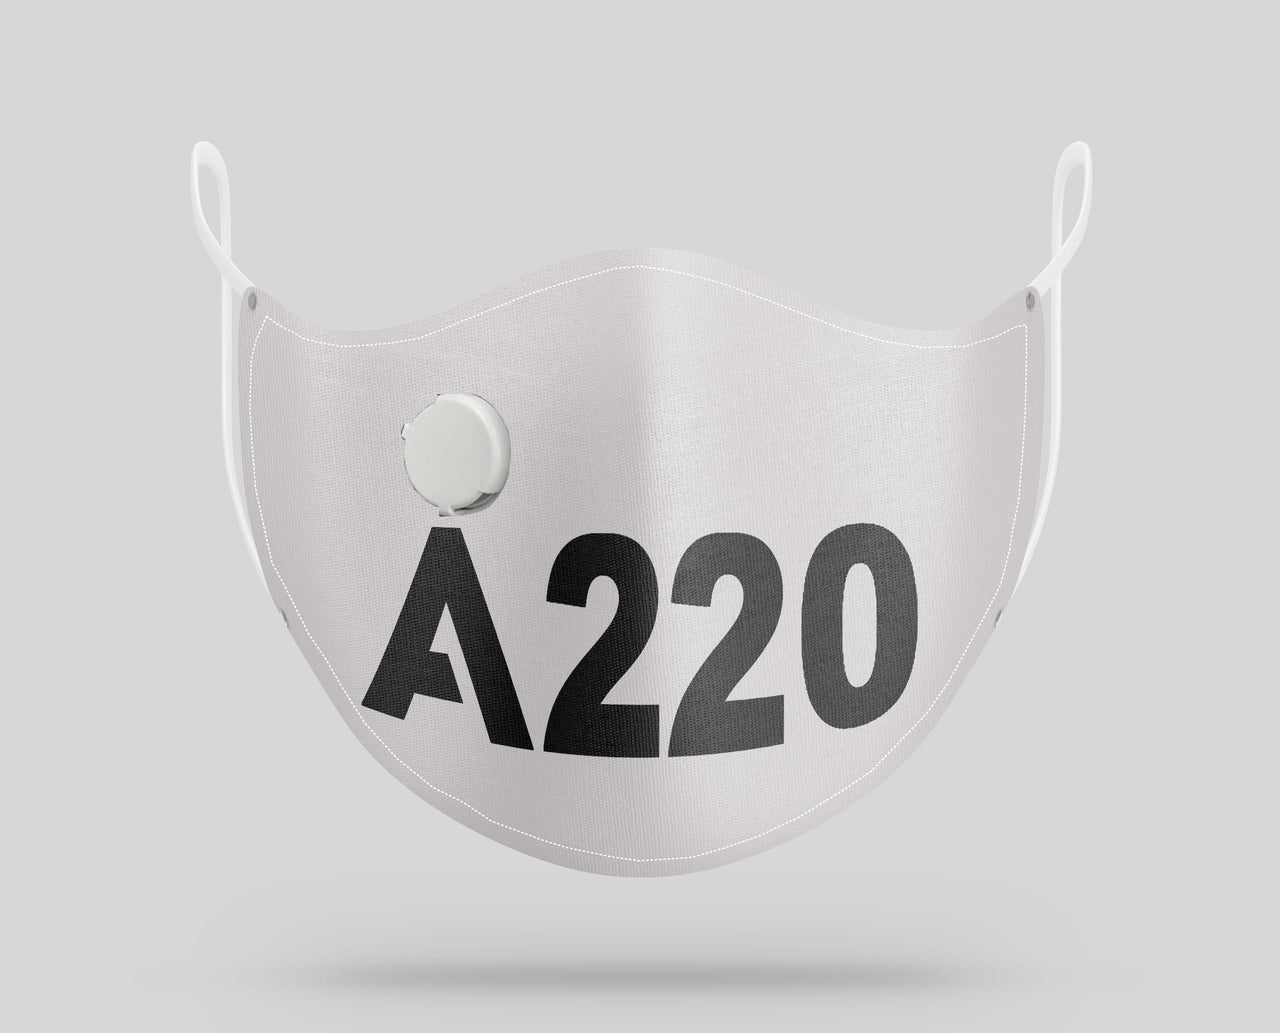 Airbus A220 Text Designed Face Masks